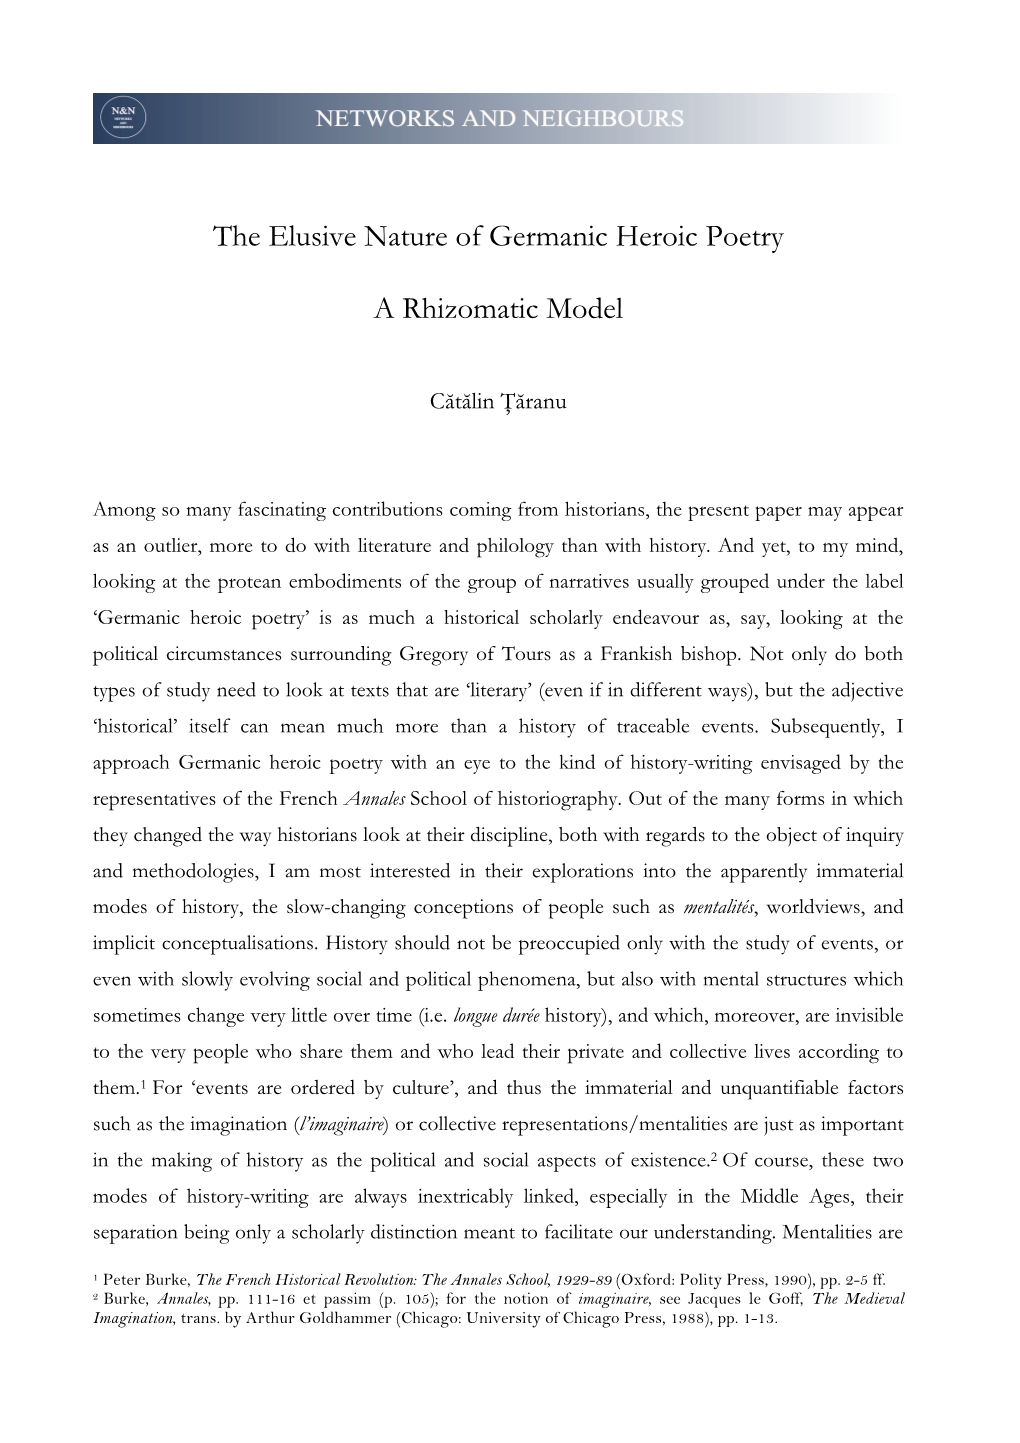 The Elusive Nature of Germanic Heroic Poetry a Rhizomatic Model